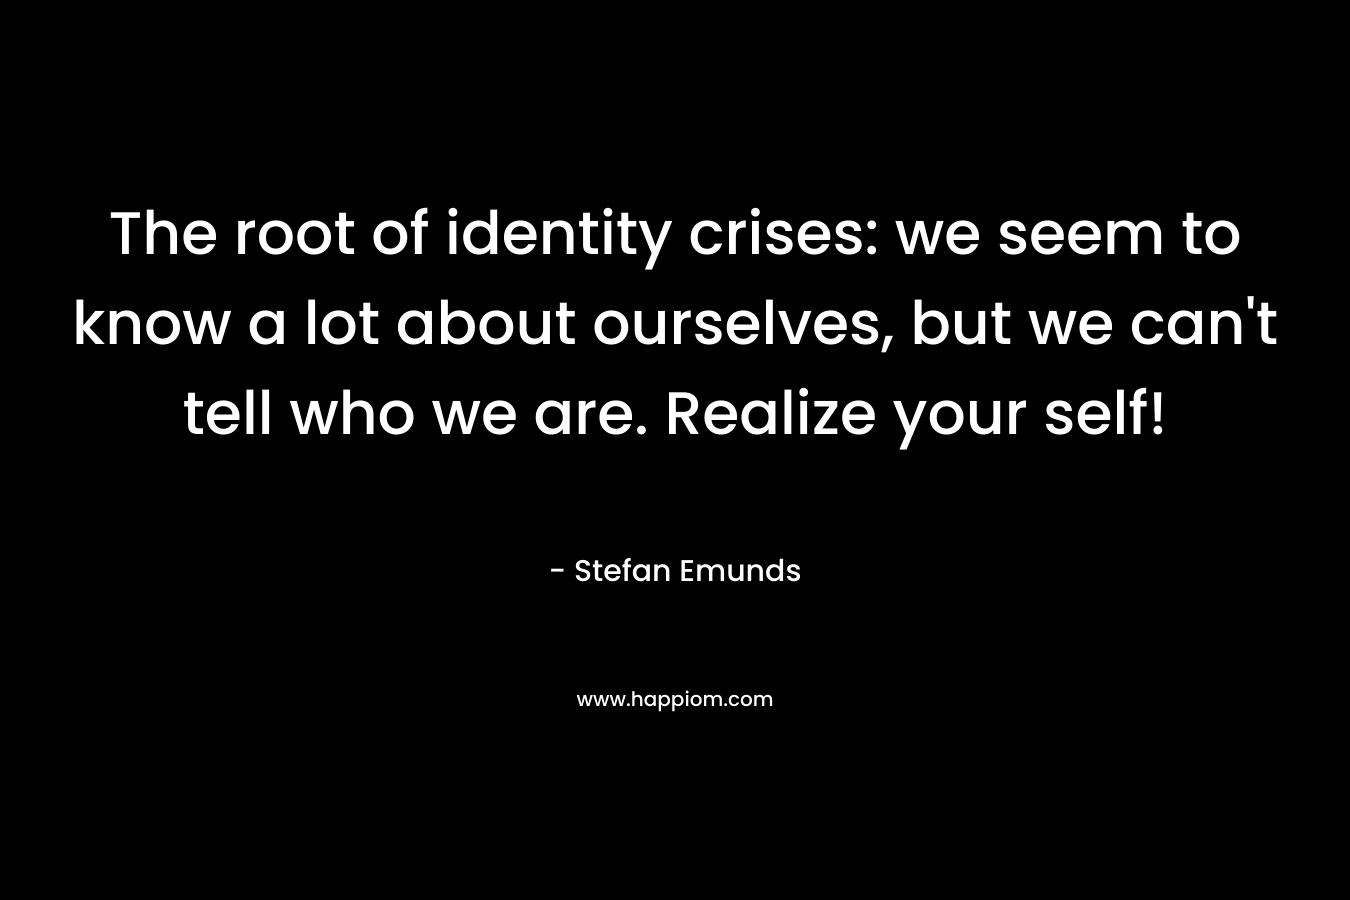 The root of identity crises: we seem to know a lot about ourselves, but we can't tell who we are. Realize your self!